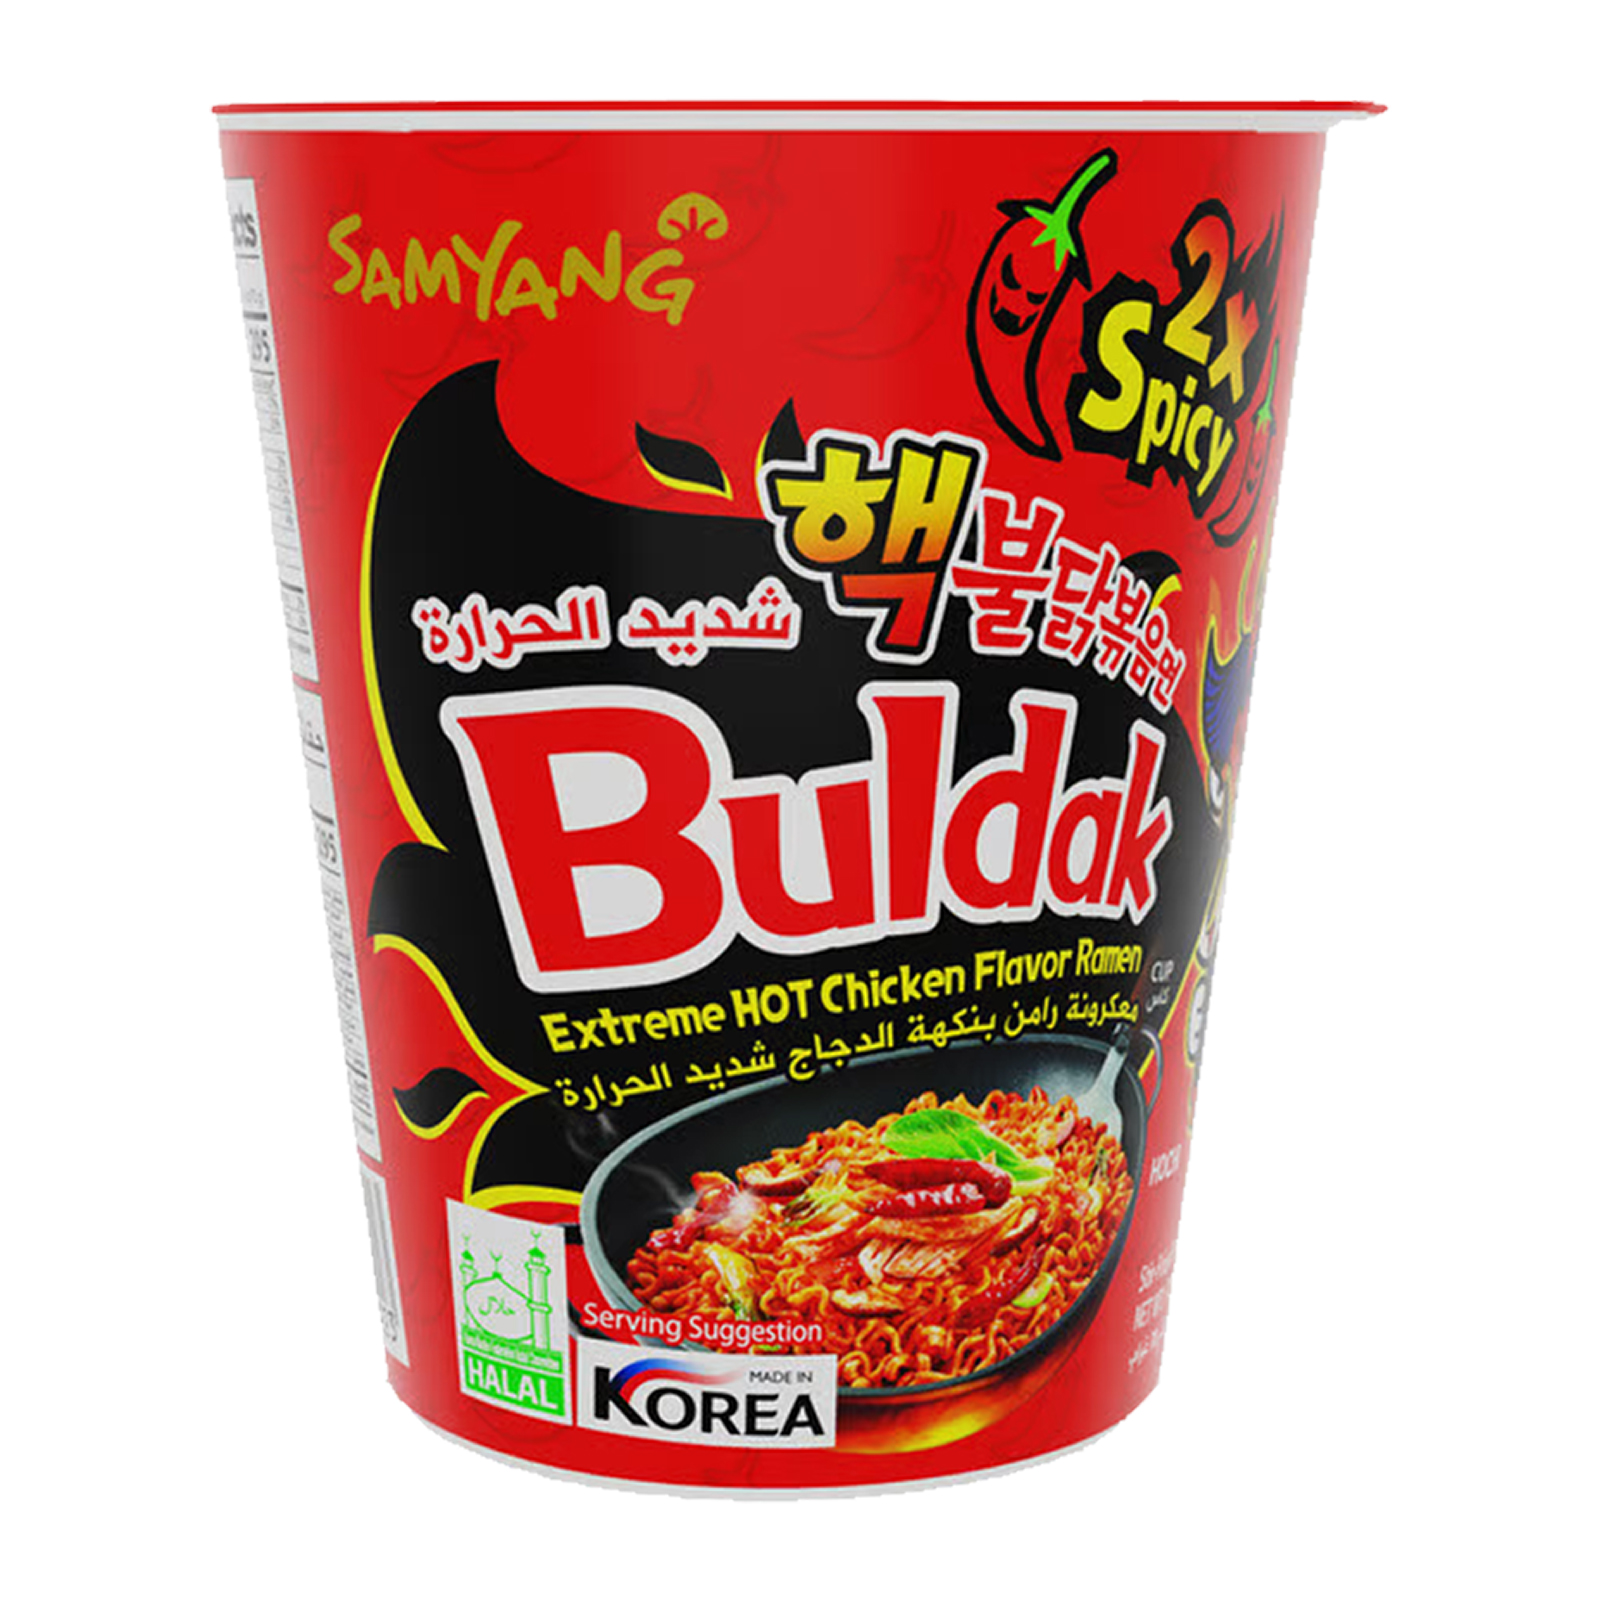  Samyang Chicken Hot Spicy 2 X Cup Noodles 6 x 70 g